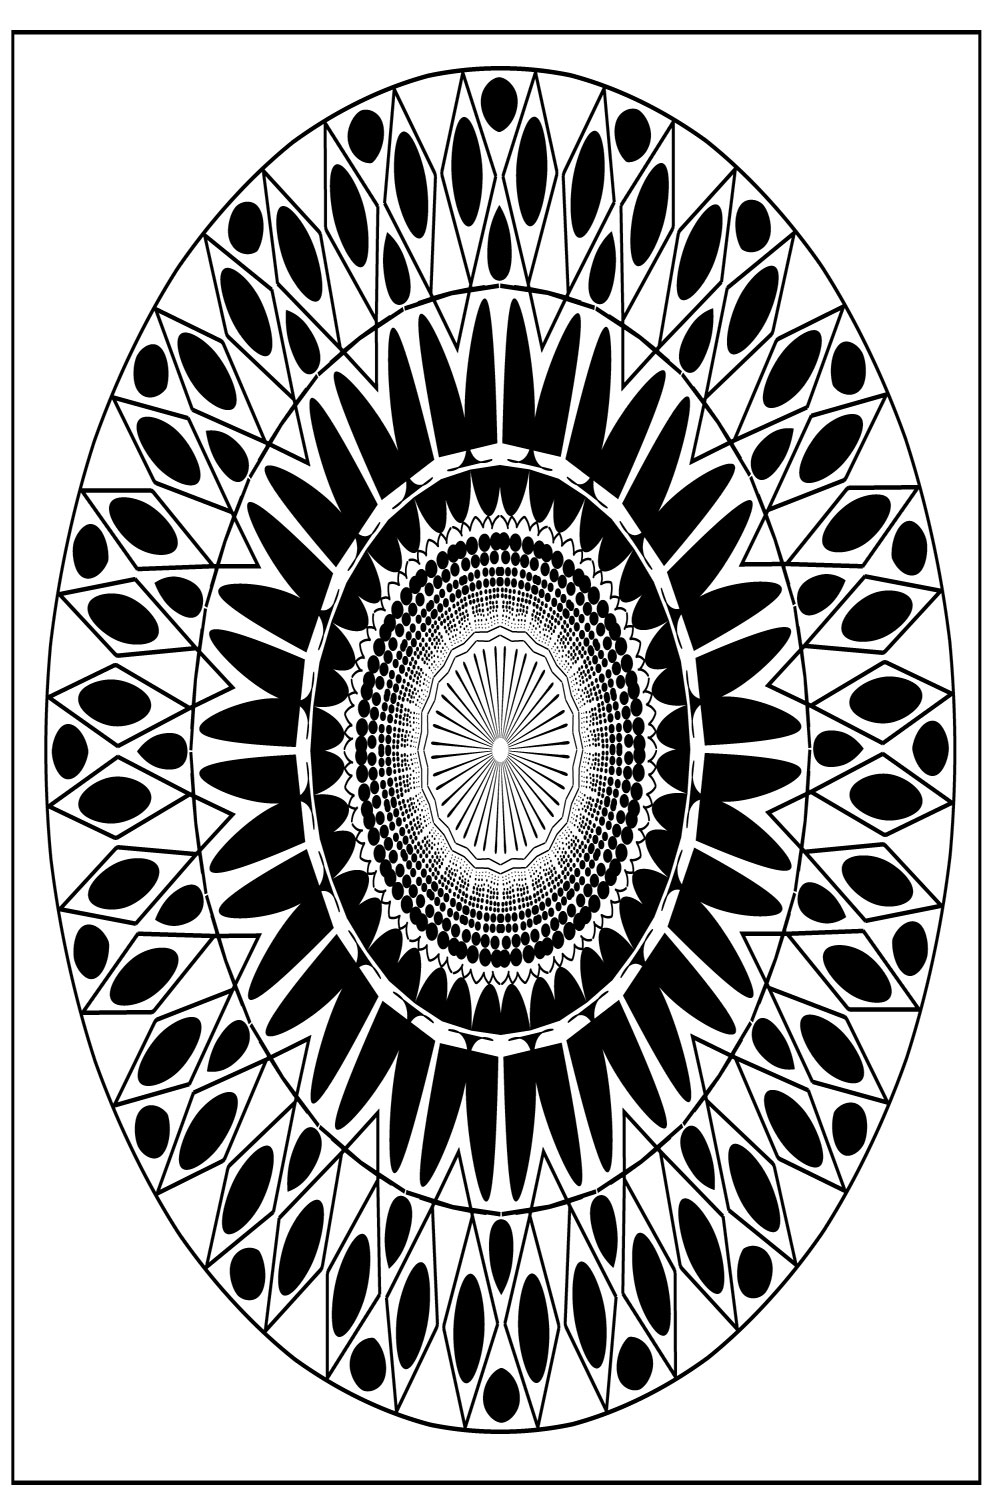 Mandala art with black white in babbles pinterest preview image.